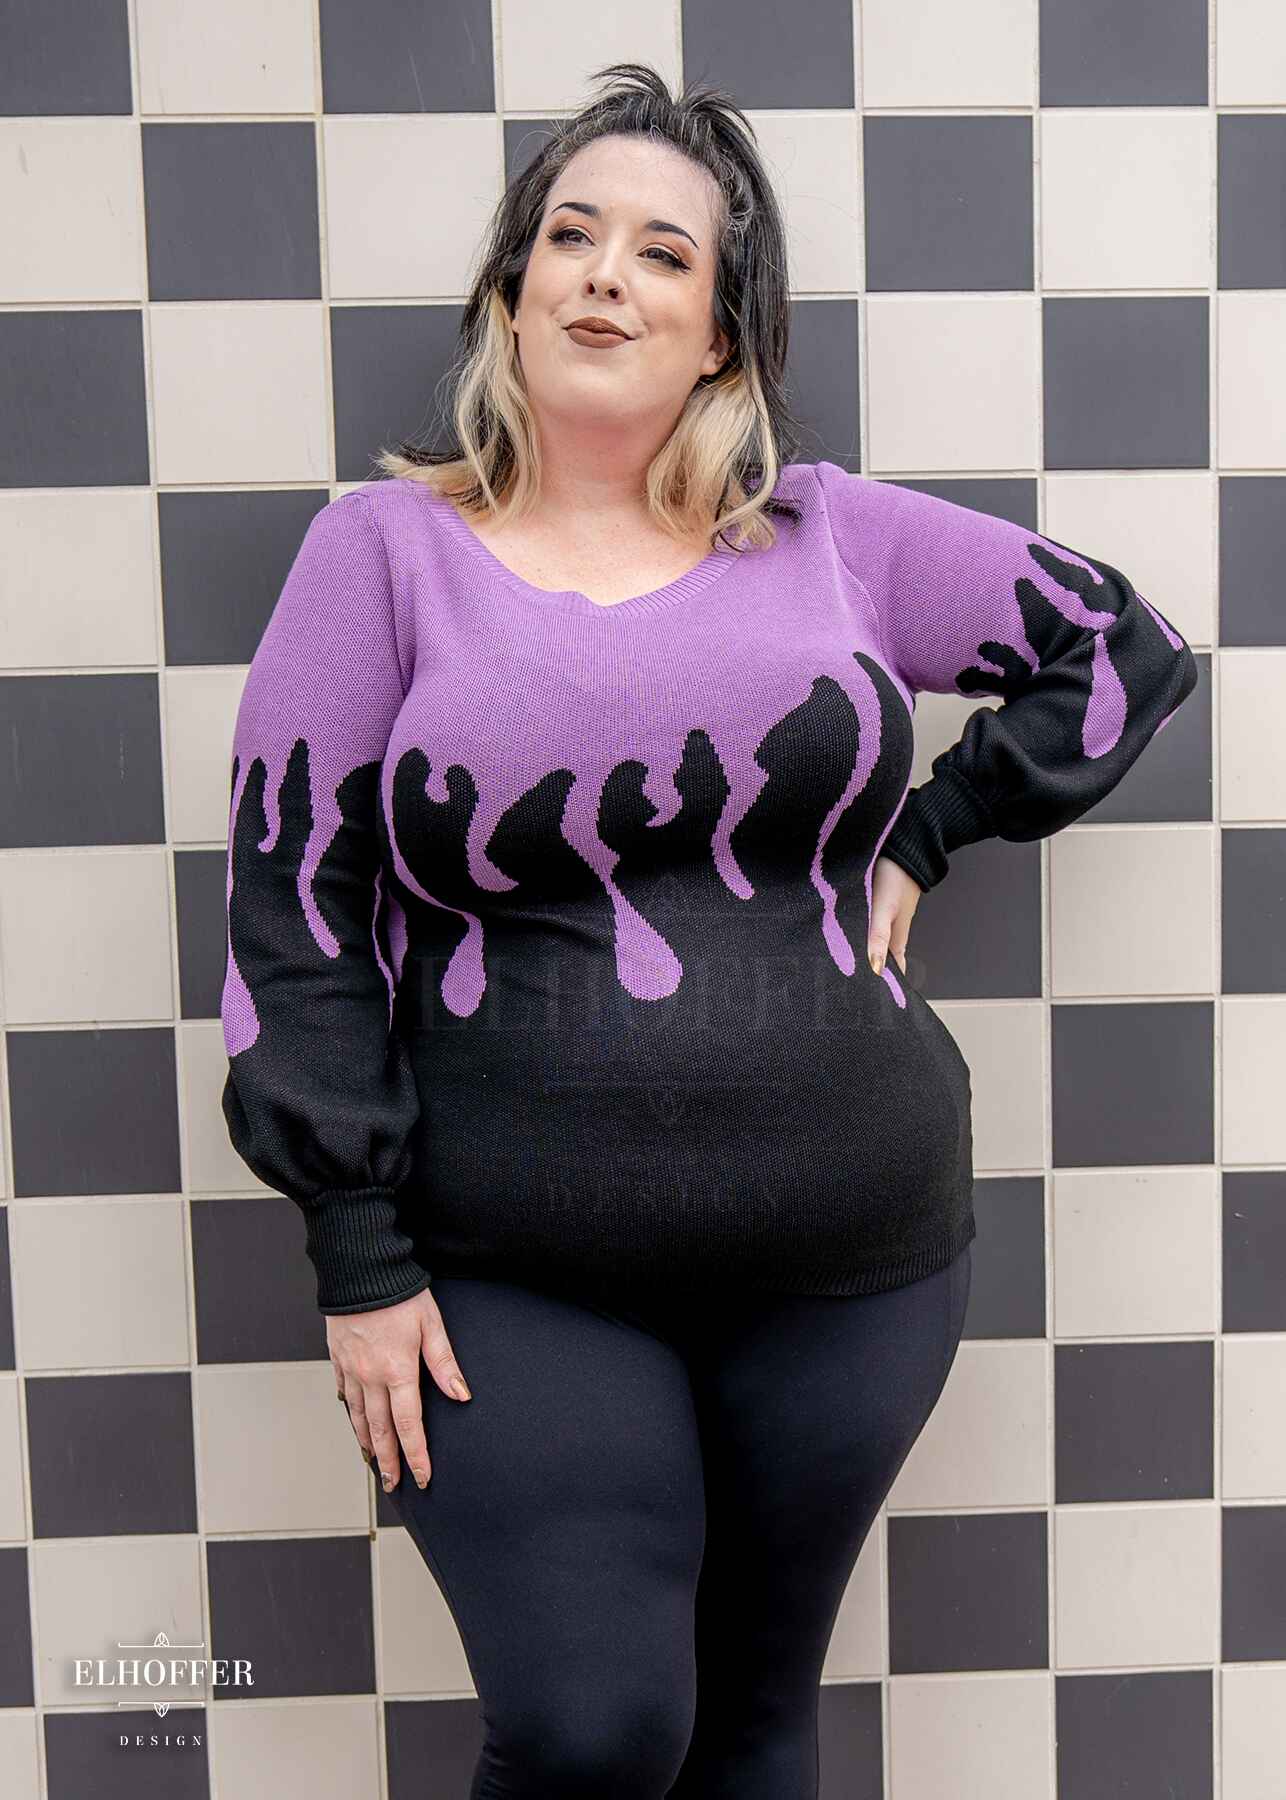 Katie Lynn, a fair skinned 2xl model with shoulder length wavy black and white hair, is wearing an oversize sweater with a lavender purple drip design that looks like it's oozing down onto a black sweater that has long billowing sleeves with thumbholes.